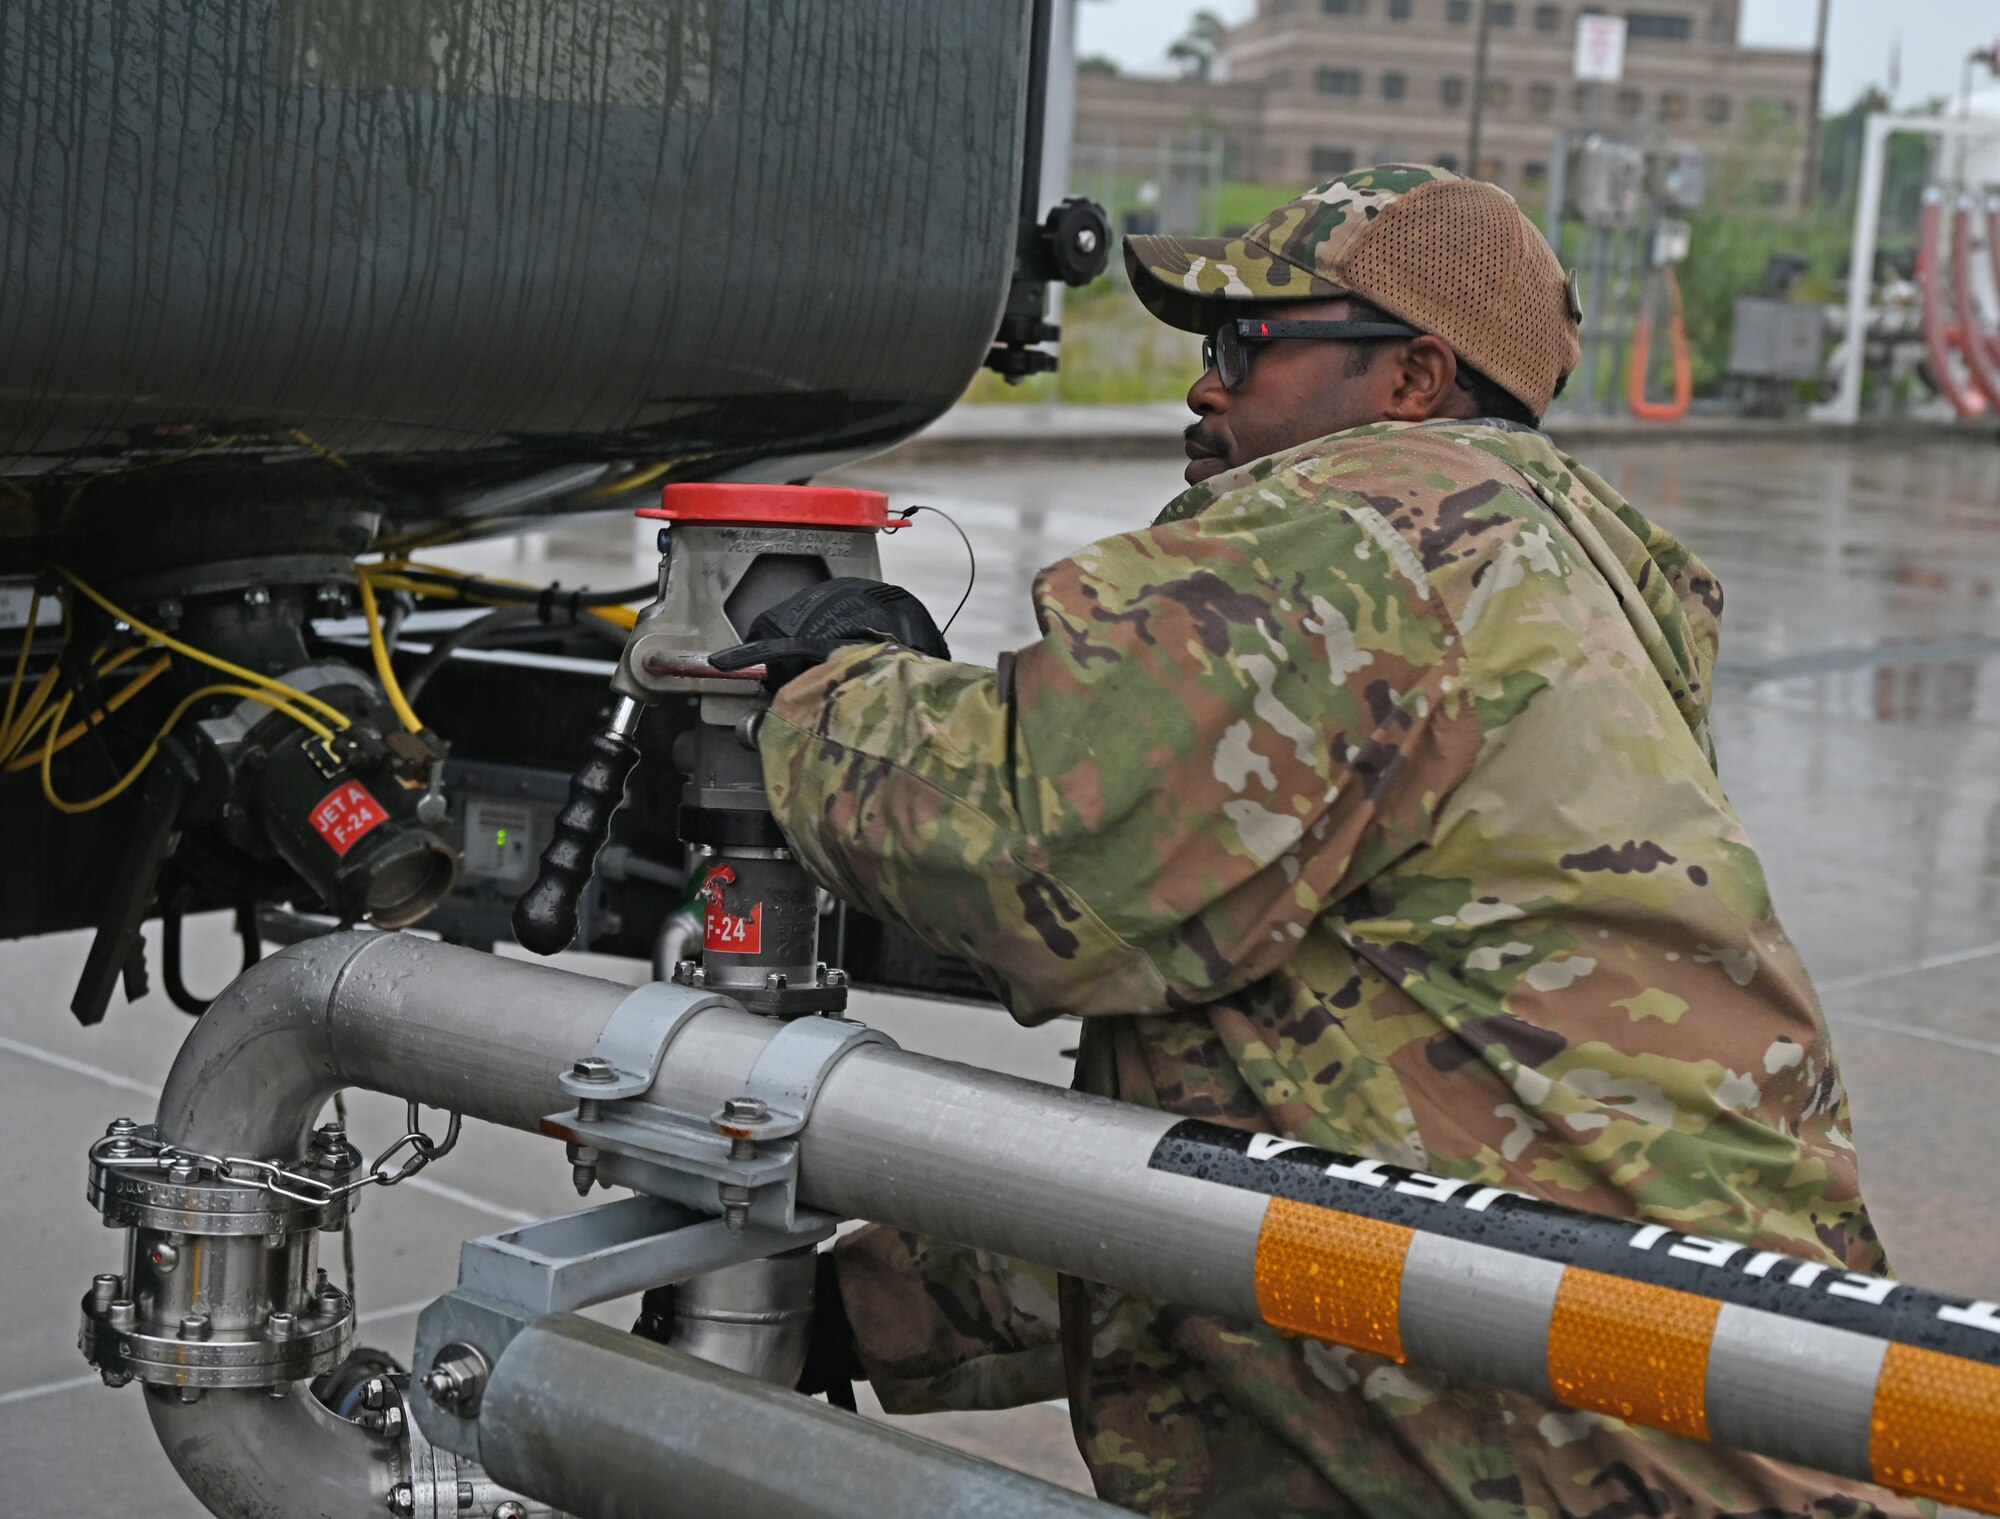 U.S. Air Force Staff Sgt. Terence Bowe, a fuels craftsman assigned to the 175th Mission Support Group, Maryland Air National Guard, fills a fuel truck with fuel at Warfield Air National Guard Base, Middle River, Md., June 23, 2022.